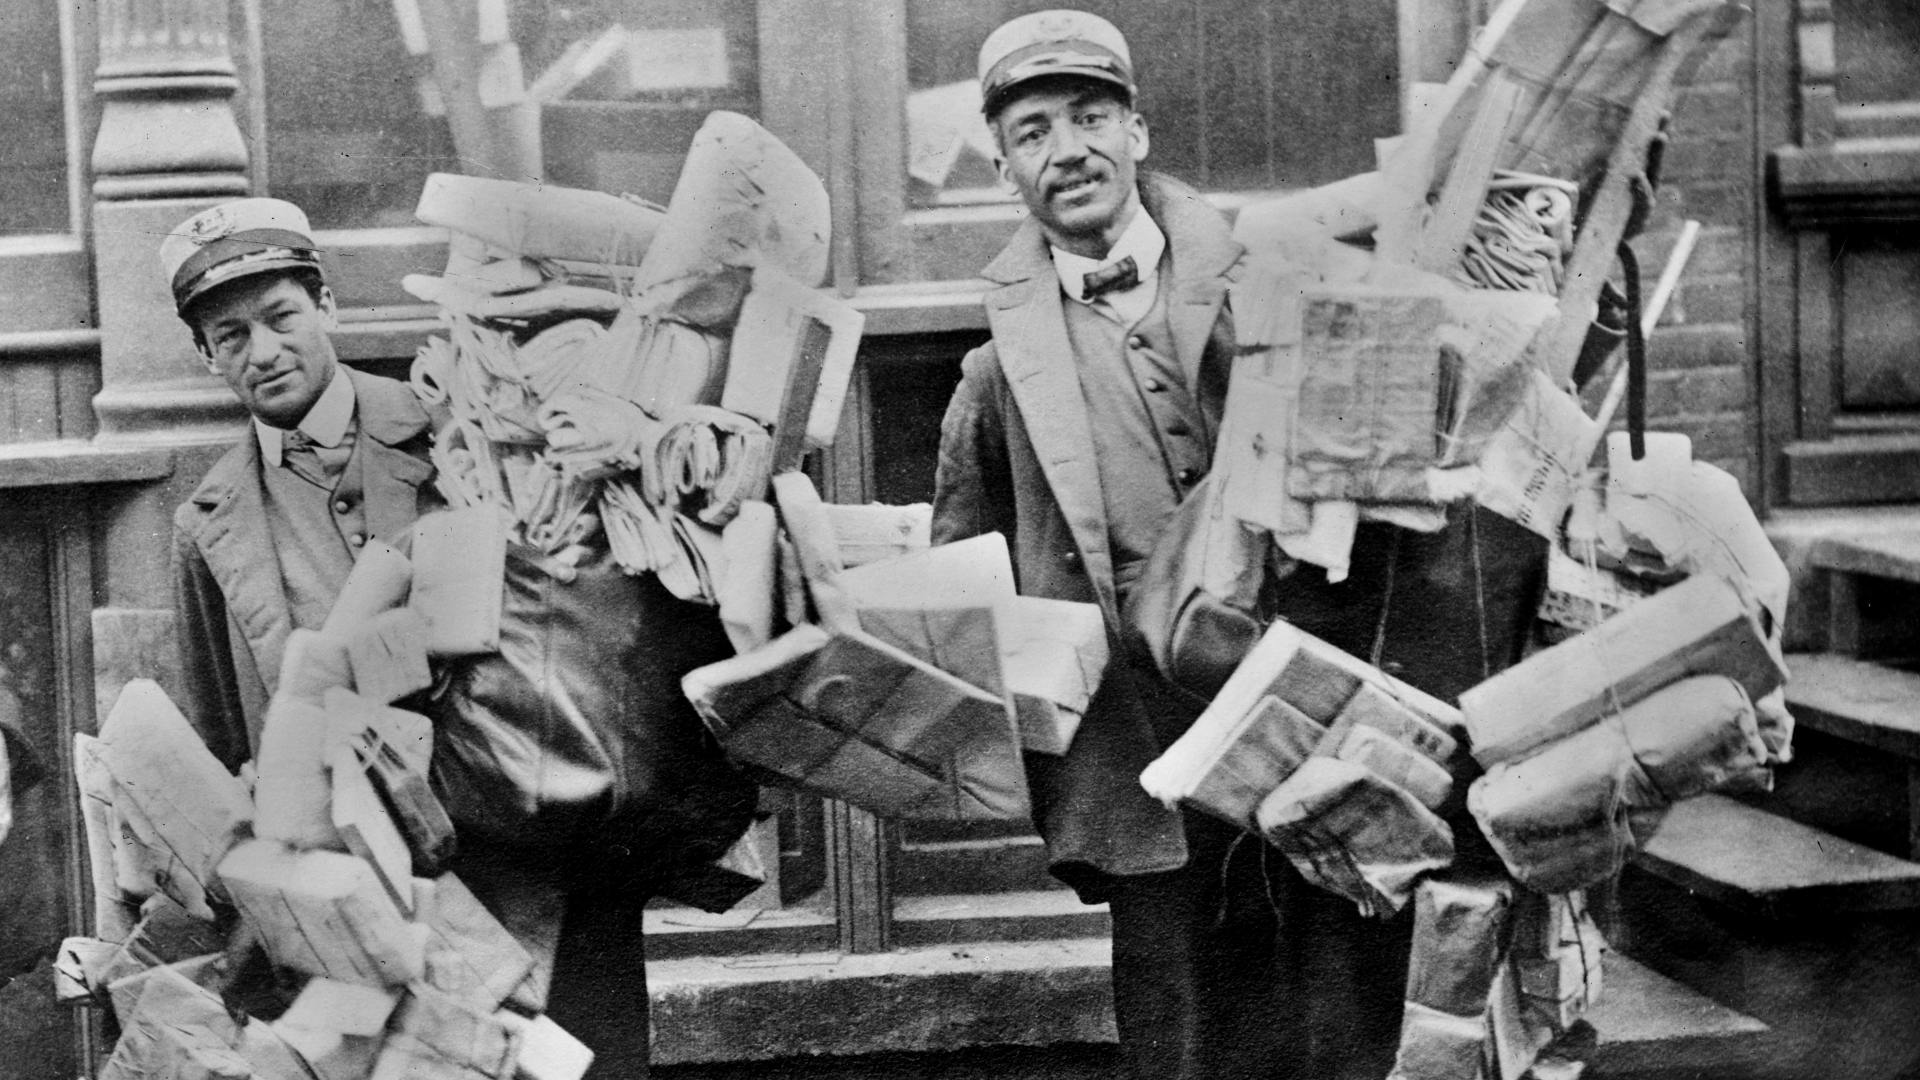 U.S. postal workers overrun with Christmas packages. With the introduction of steel rails in the 19th century, the commercialization of Christmas as a means to support the economy took hold.